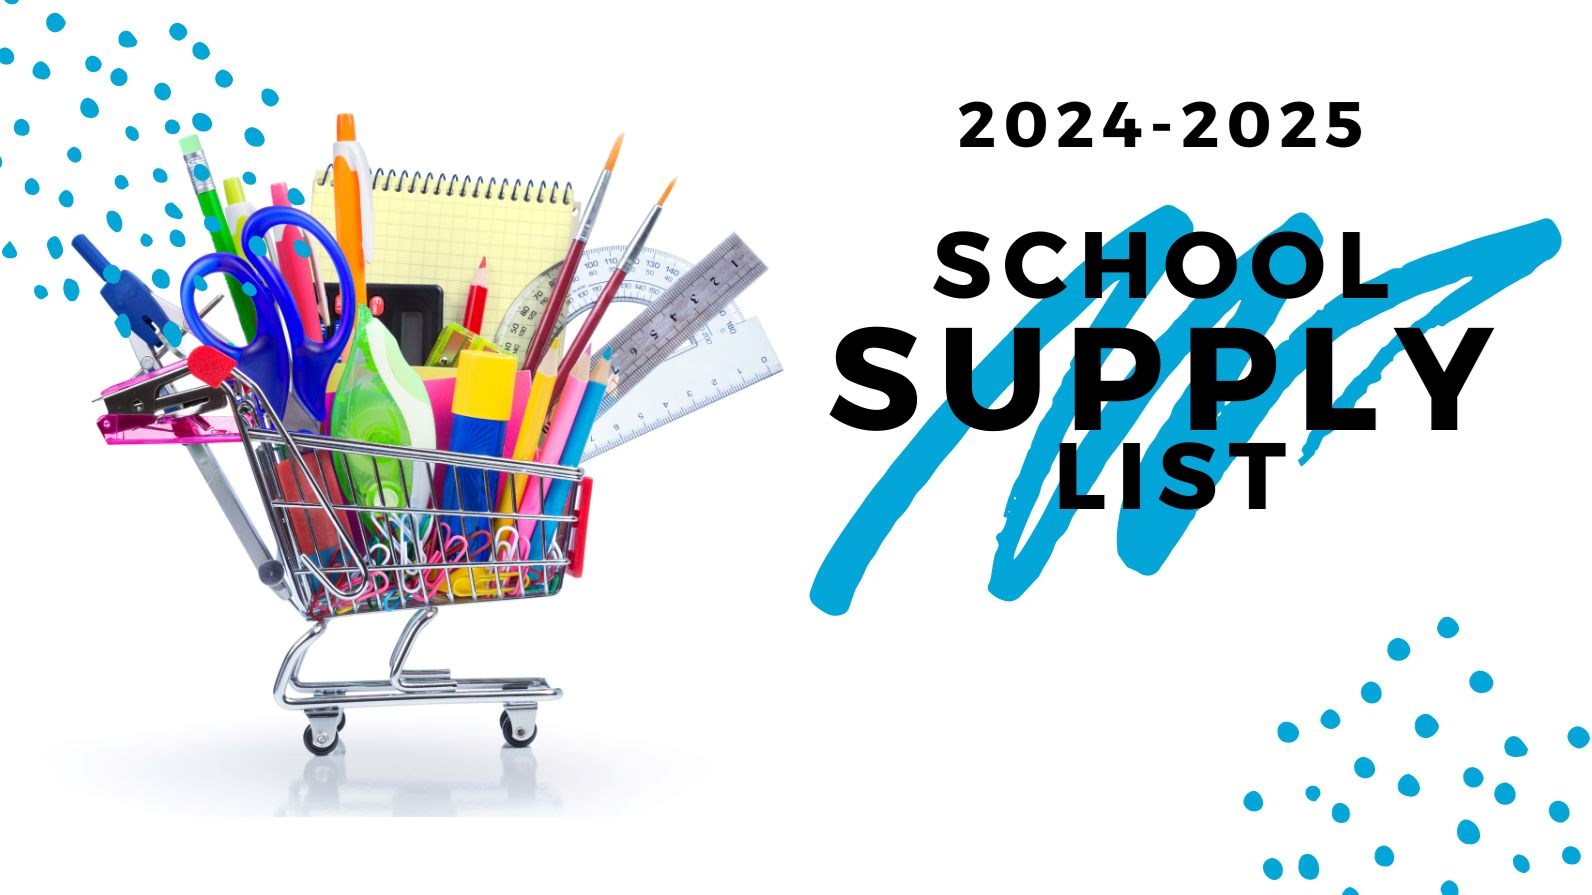 grocery cart full of school supplies and the words 2024-2025 School Supply List